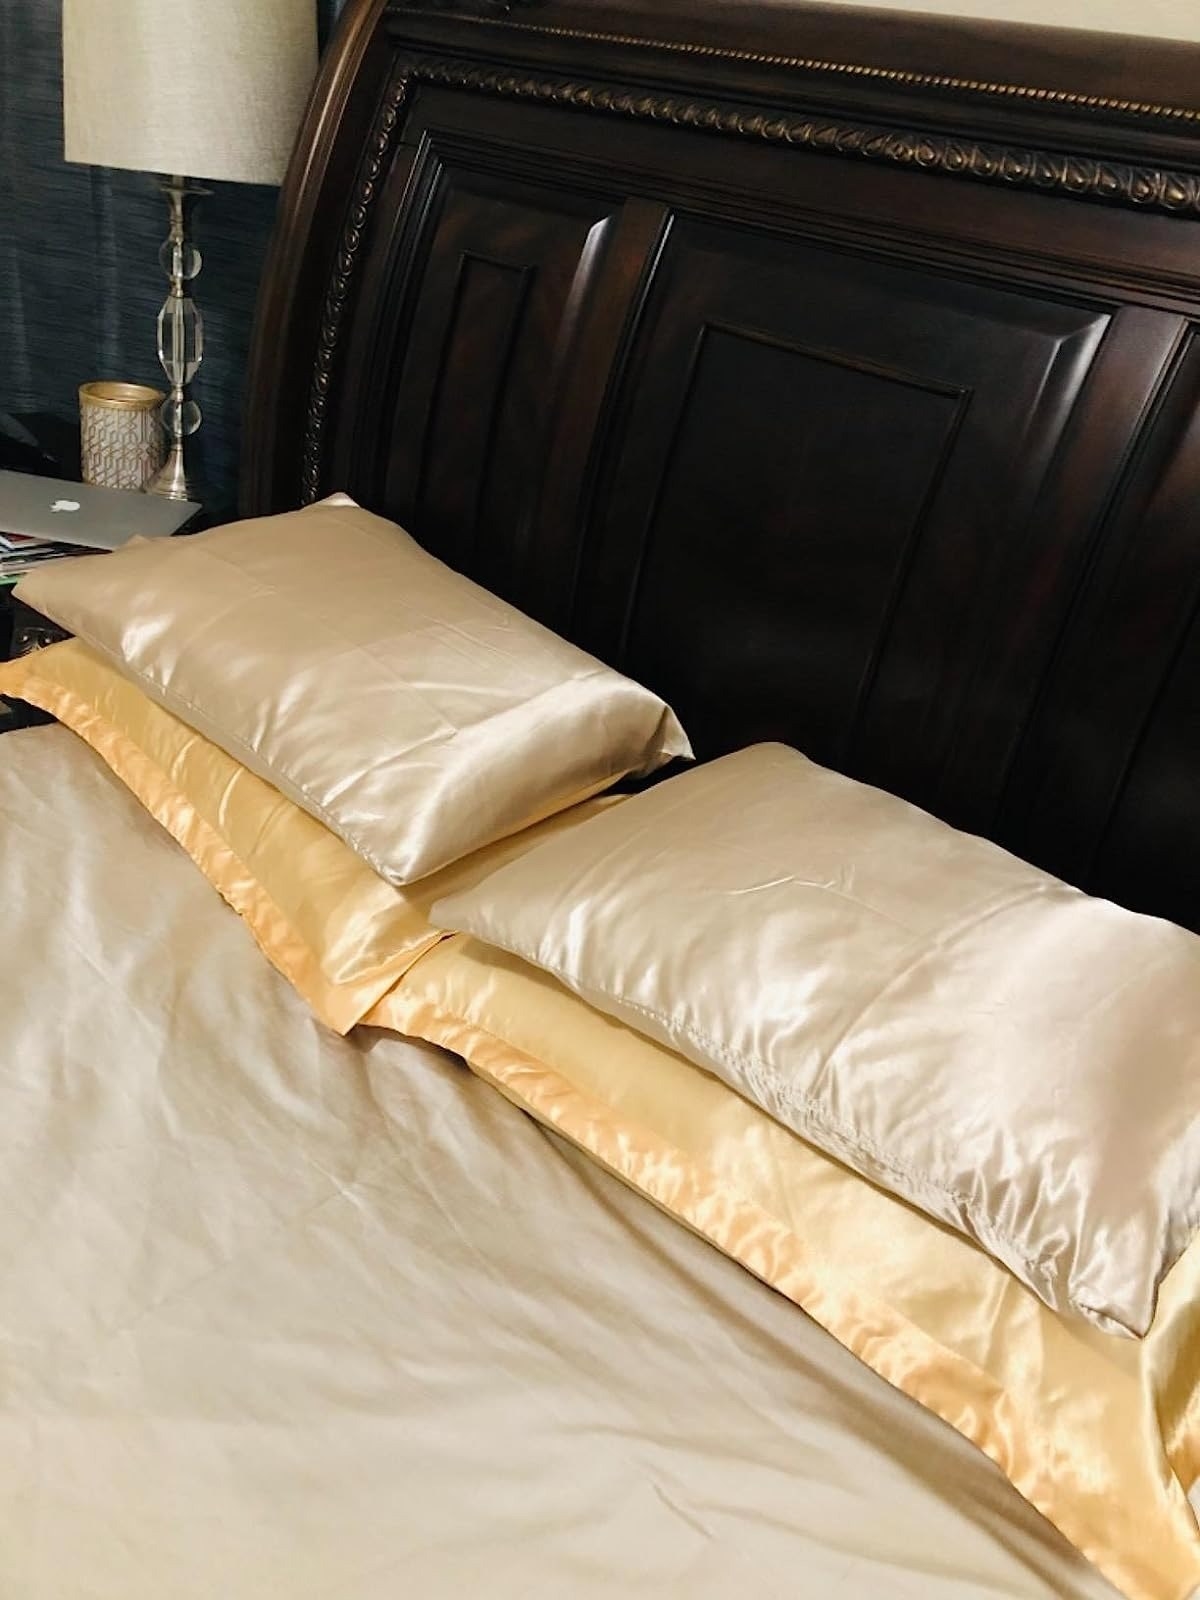 reviewer image of four pillows in satin pillowcases on a bed